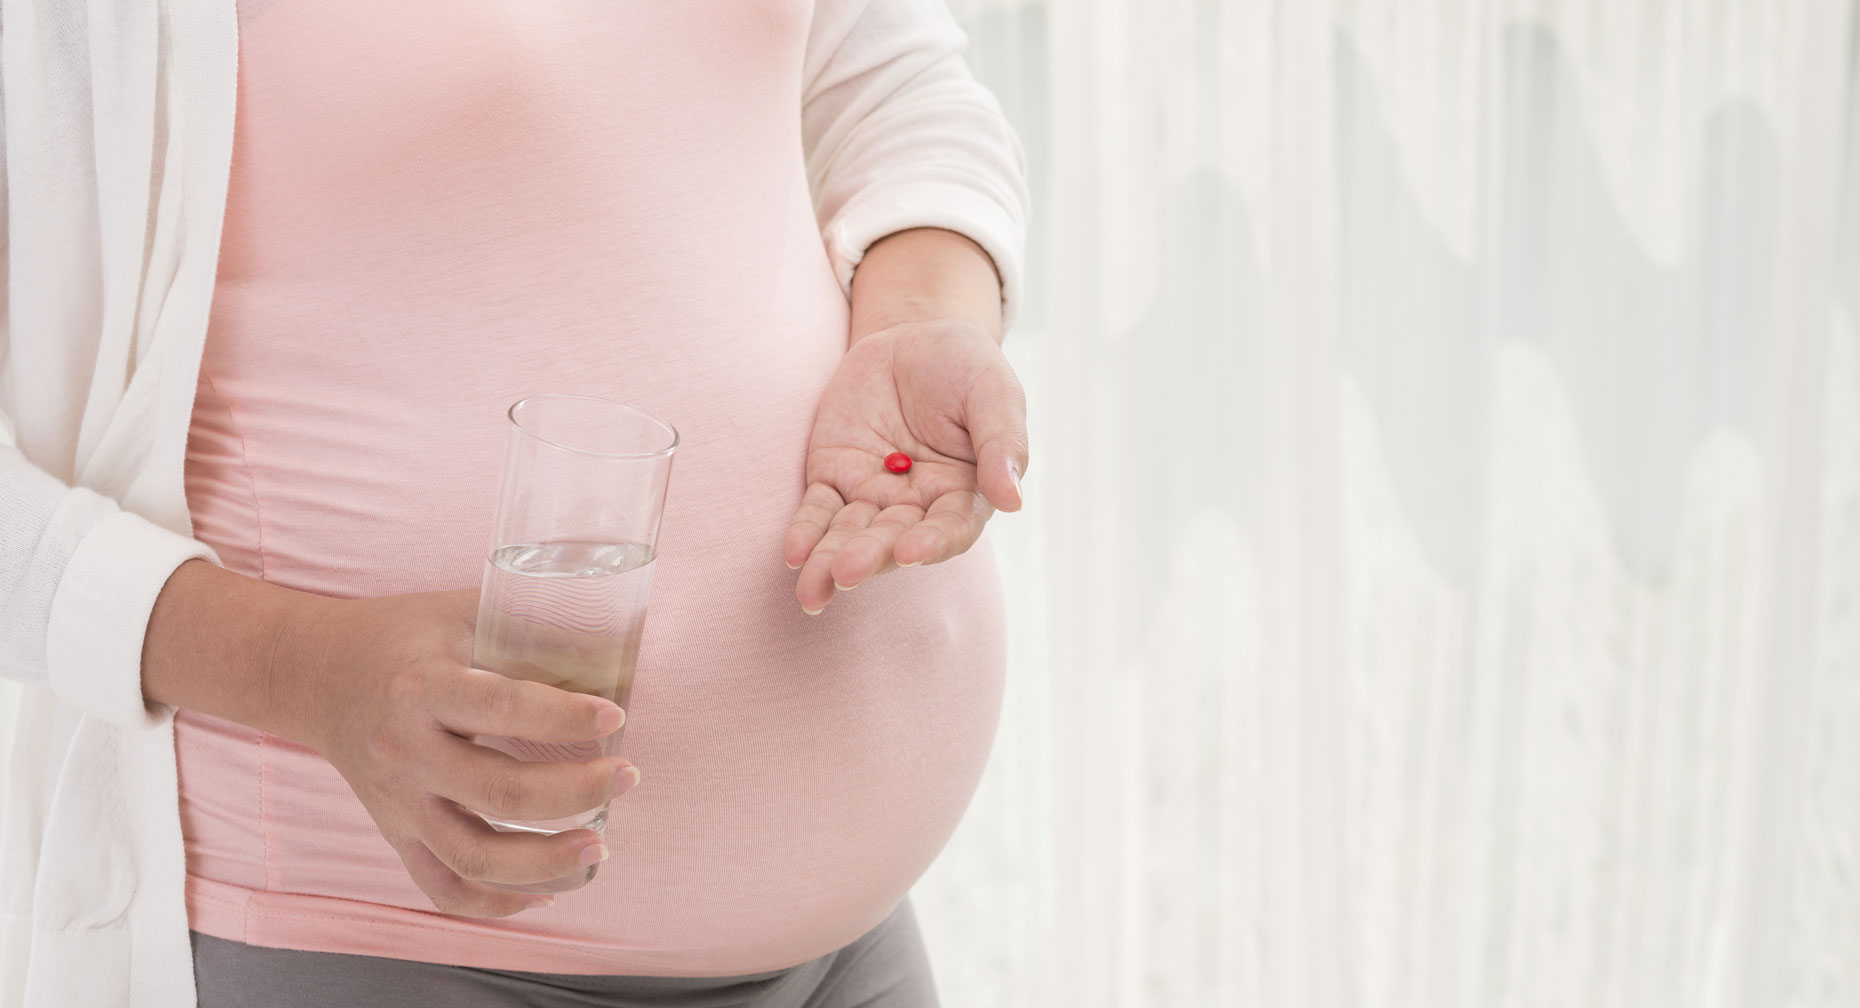 Taking Medication During Pregnancy, by Premier Health